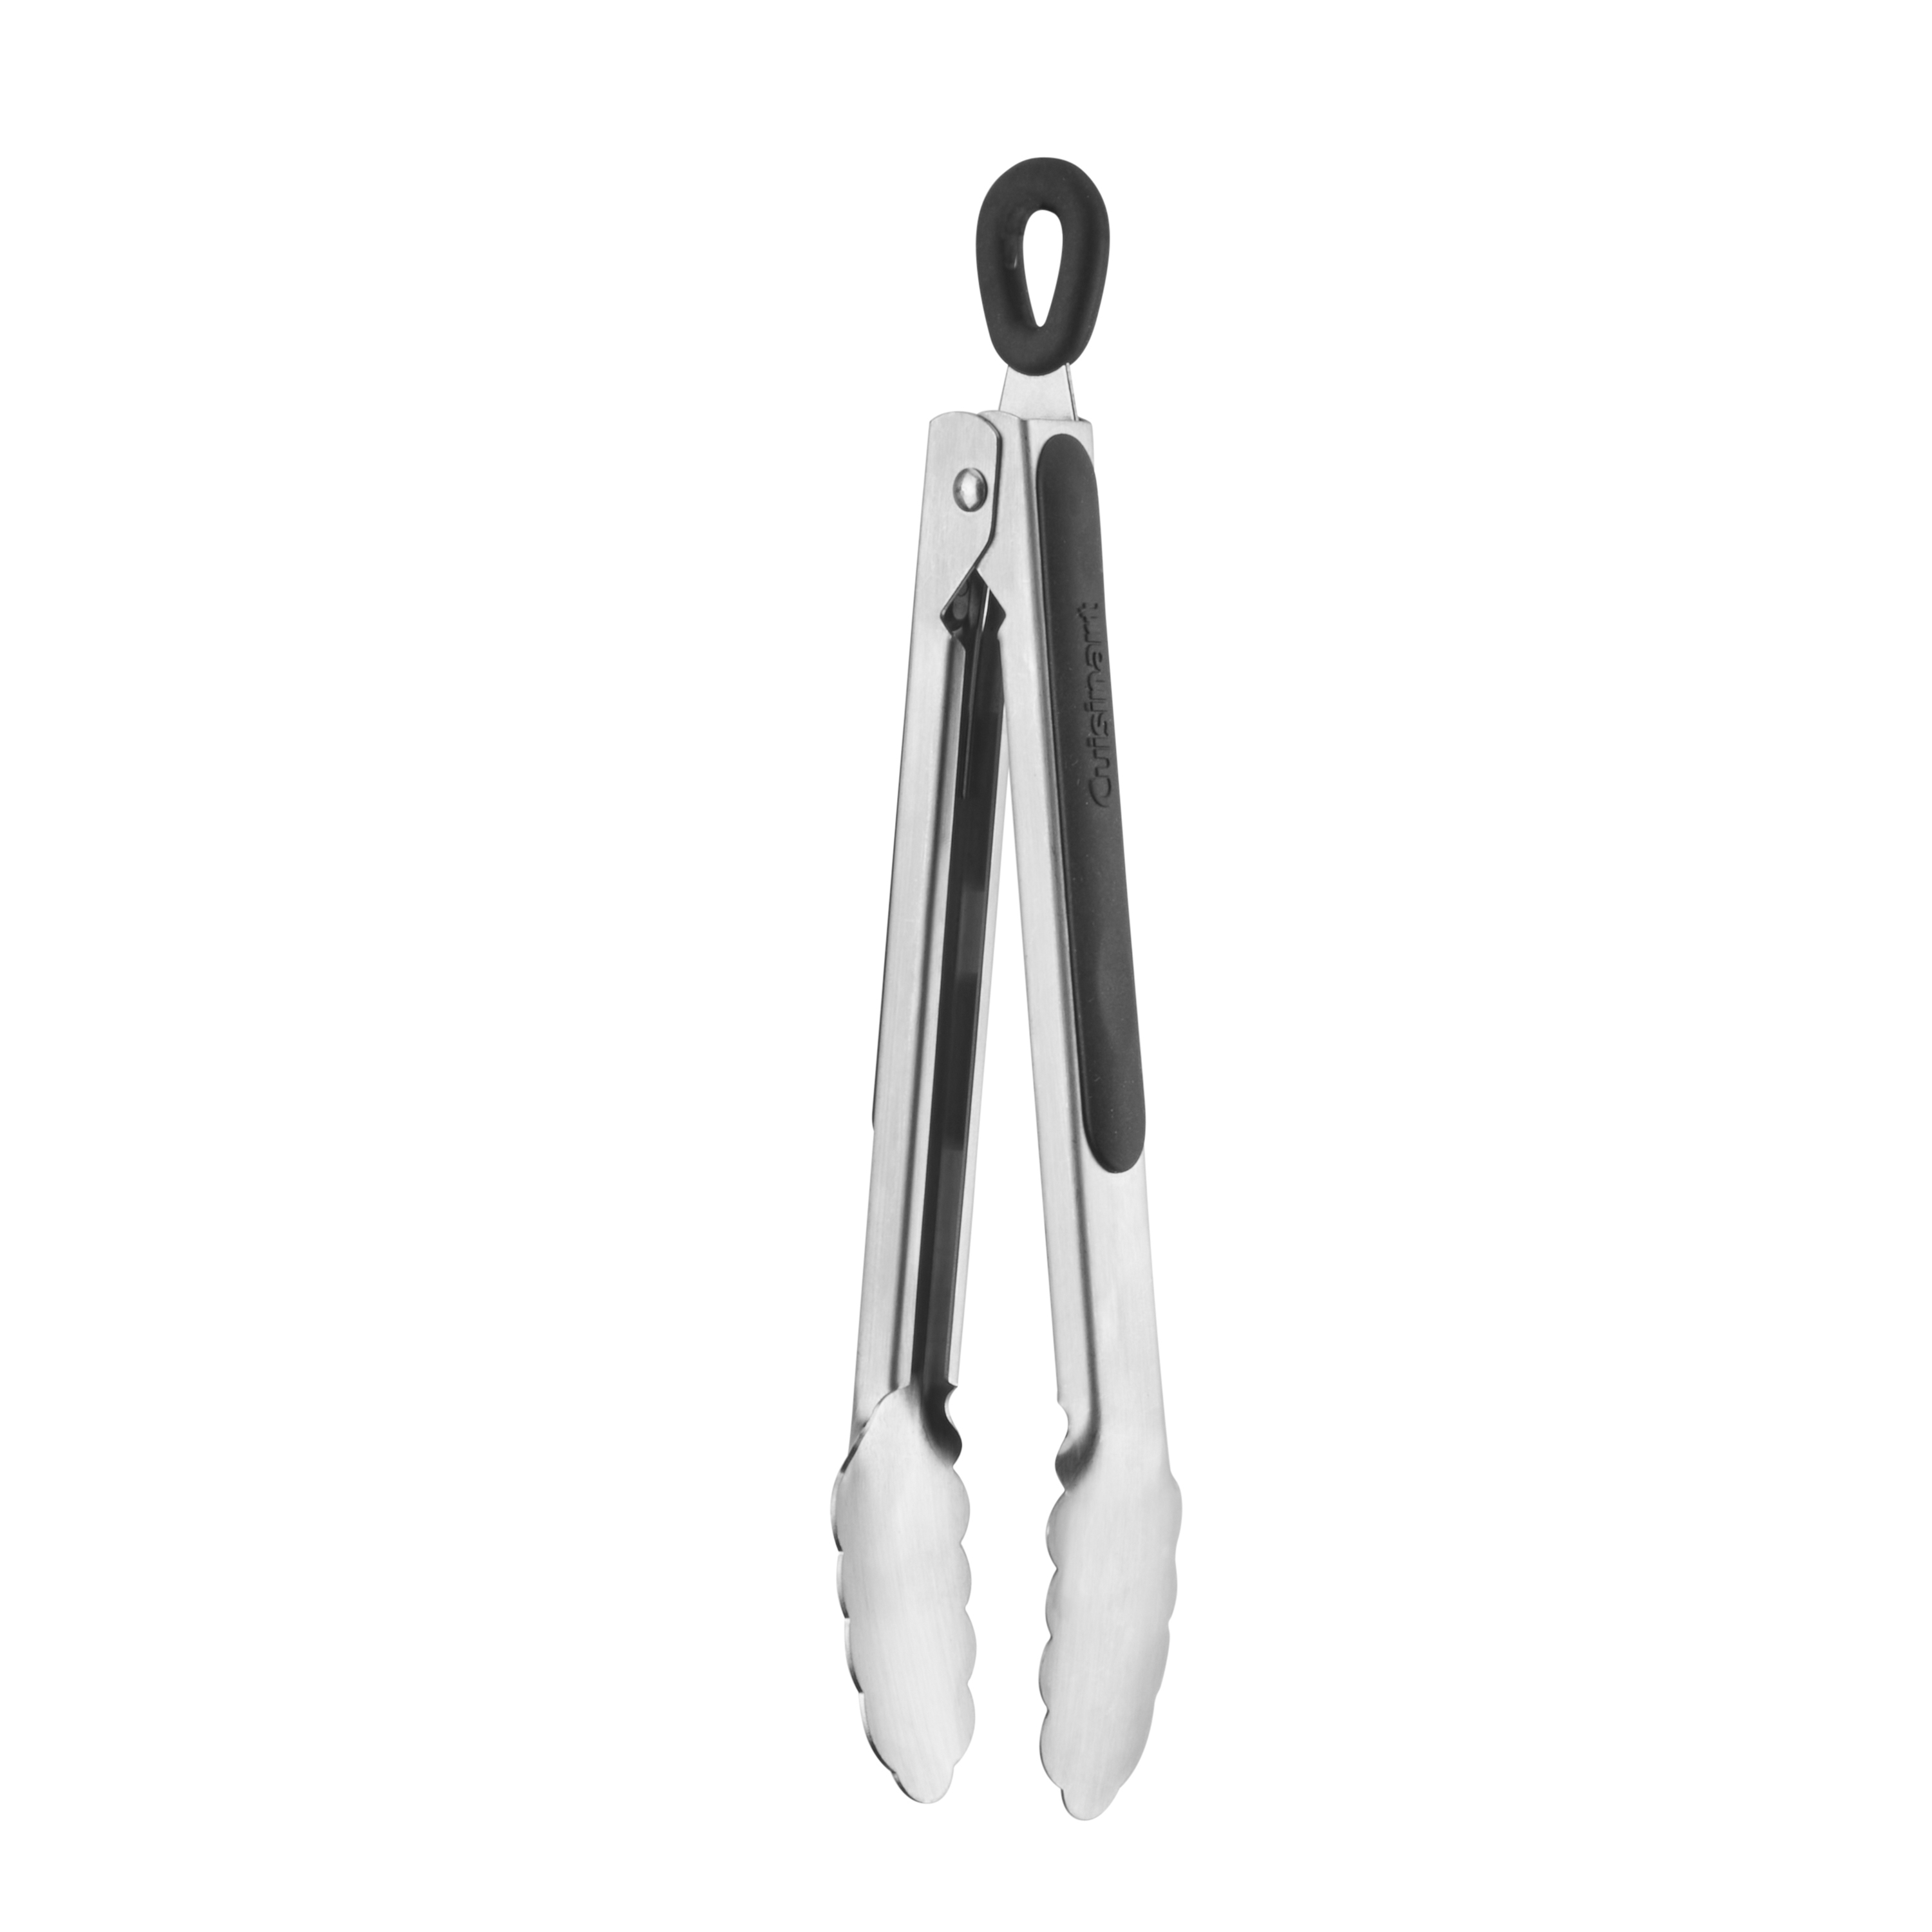 2pc Tong Set: 7" and 9" Stainless Steel Tongs